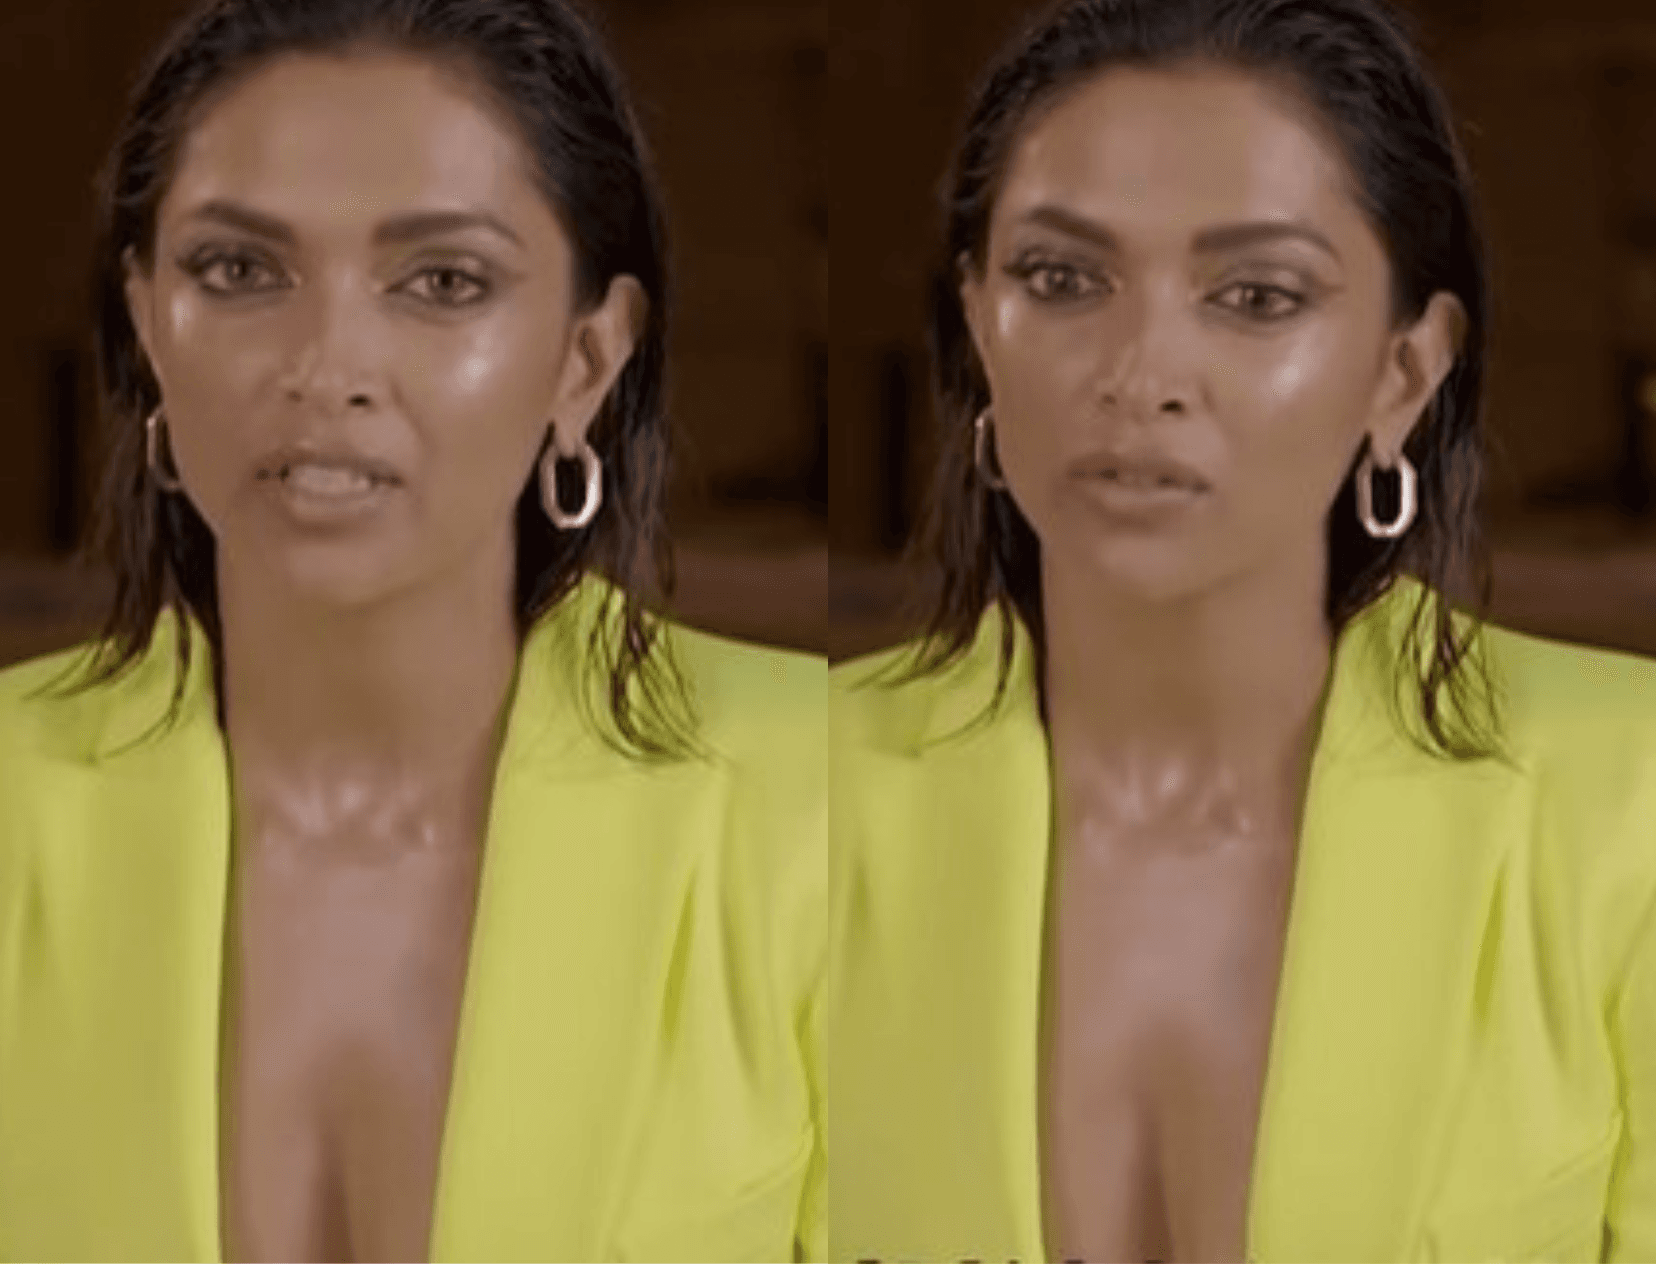 Deepika Padukone Talks About Going Makeup-Free But Gets Brutally Trolled